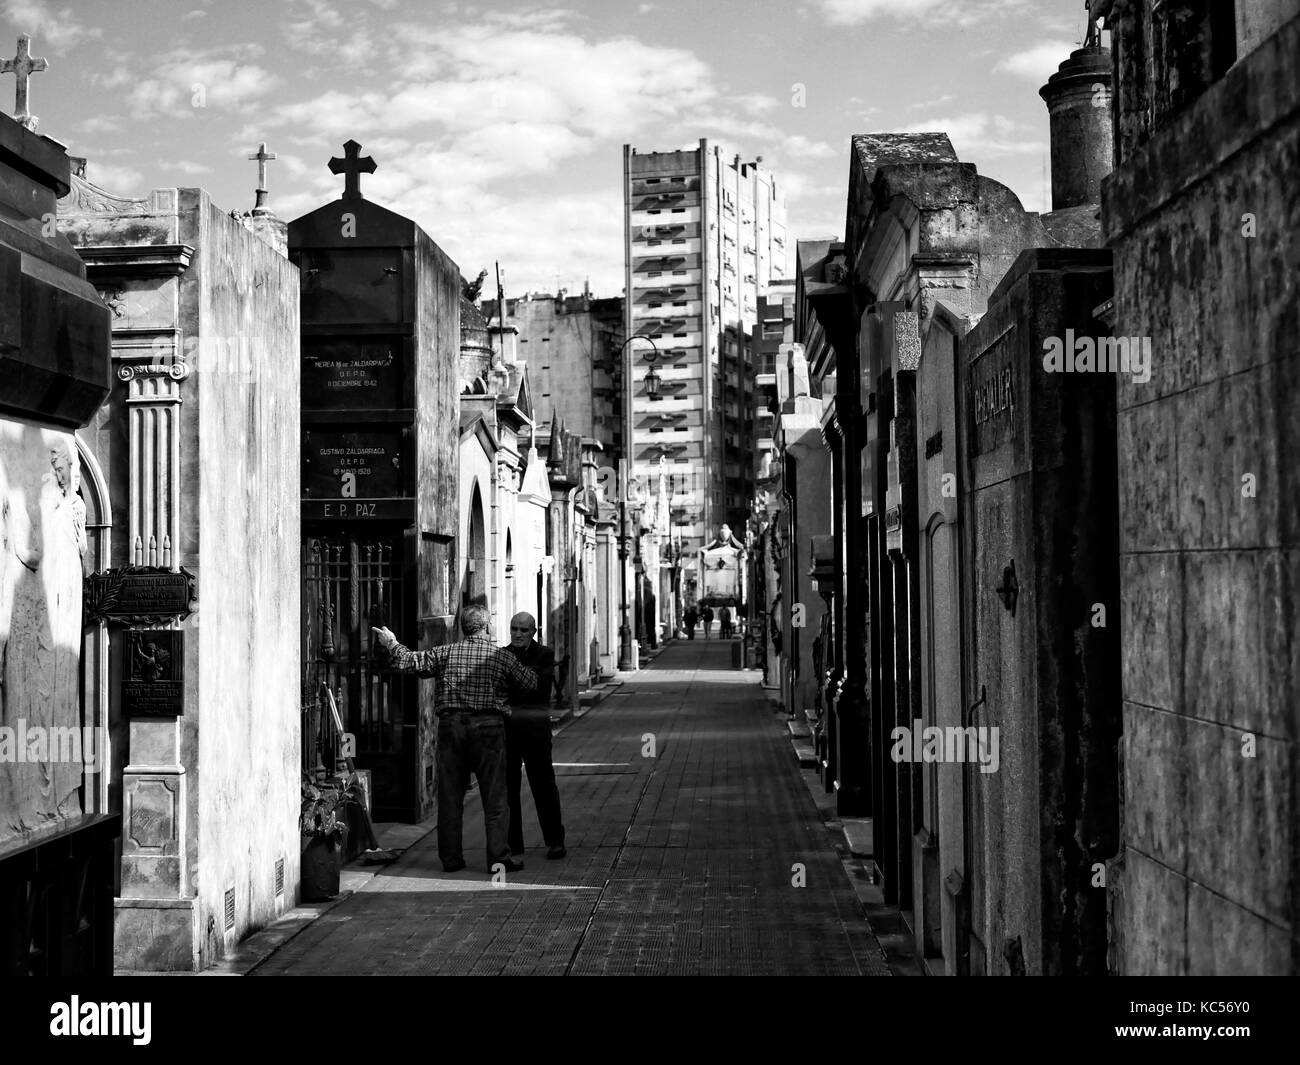 Rows of Mausoleums at Recoleta cemetary, Buenos Aires, Argentina Stock Photo